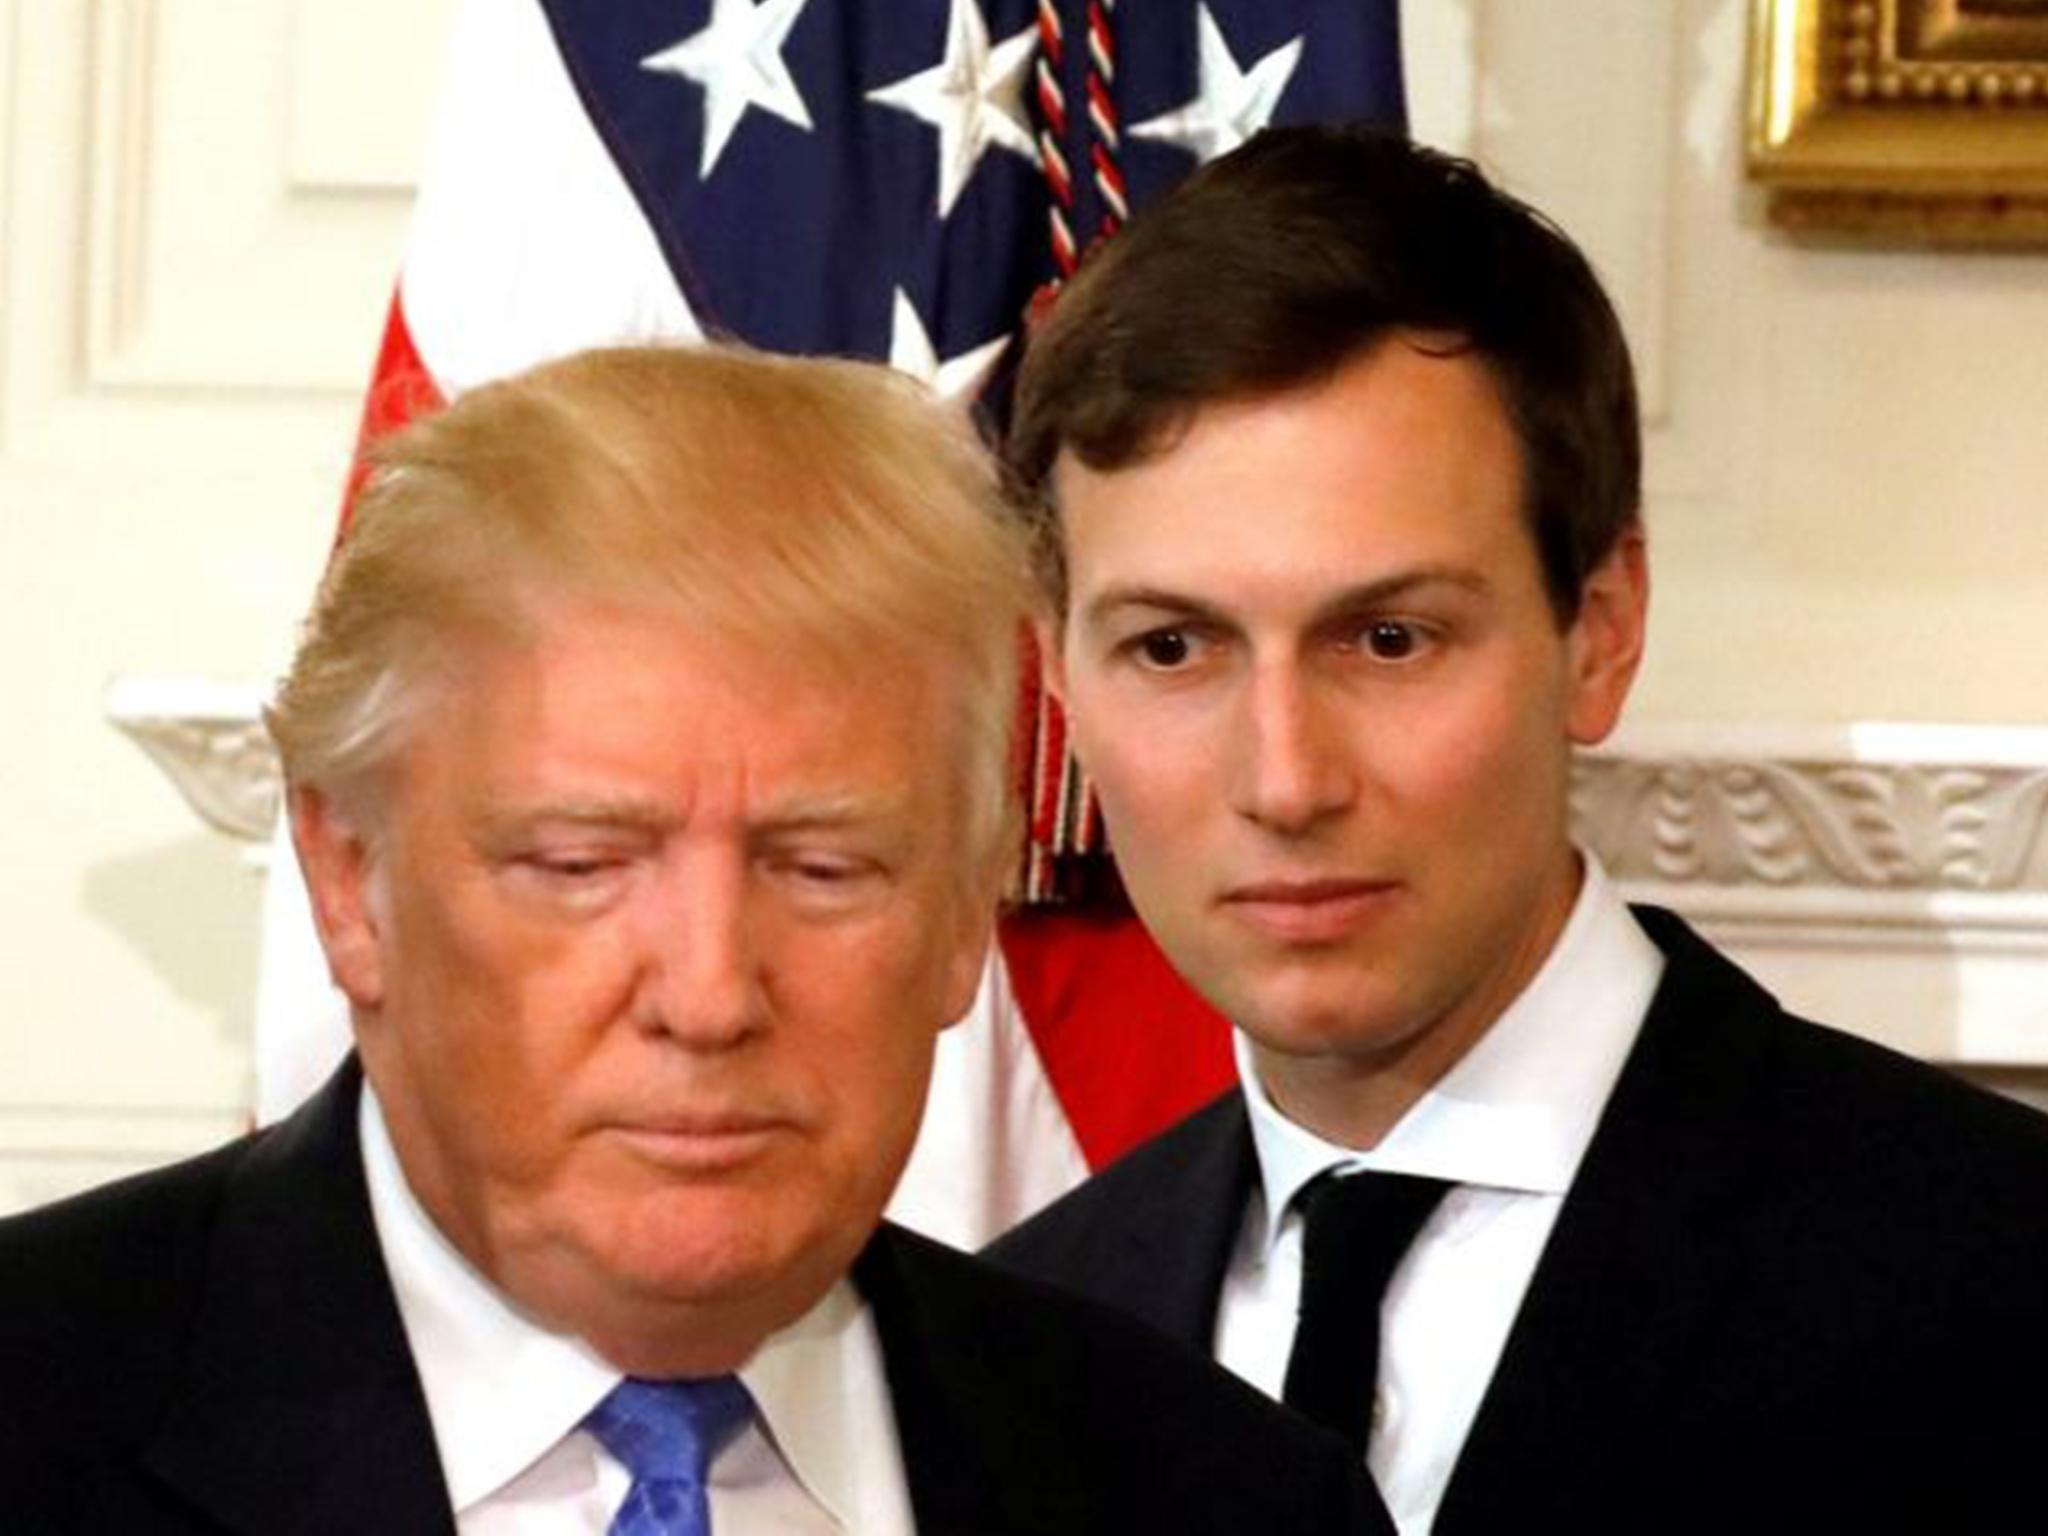 President Donald Trump and Jared Kushner may have colluded on the alleged Russia link plan